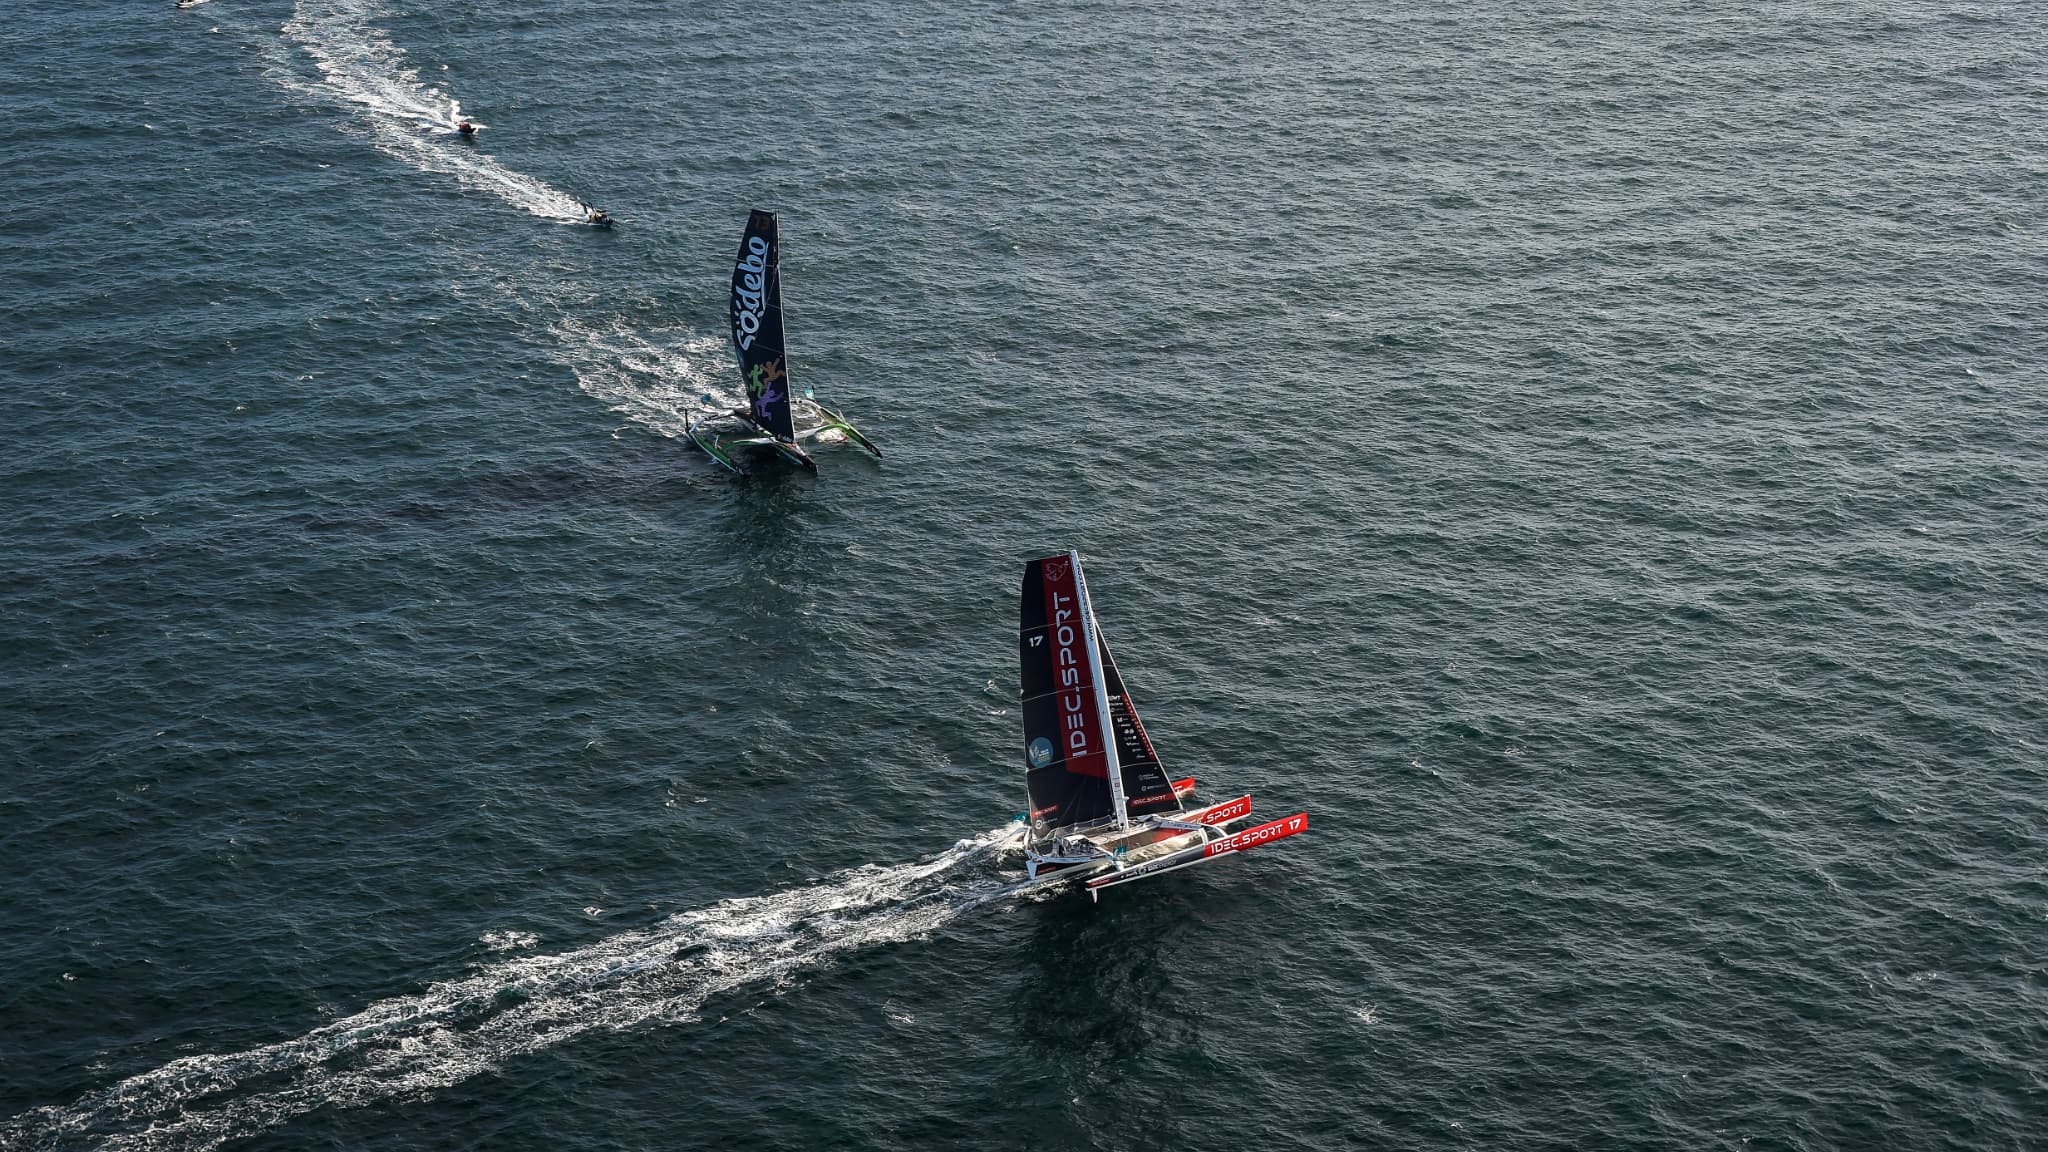 “A challenge that unites an entire nation,” France wants to be ambitious for the America’s Cup